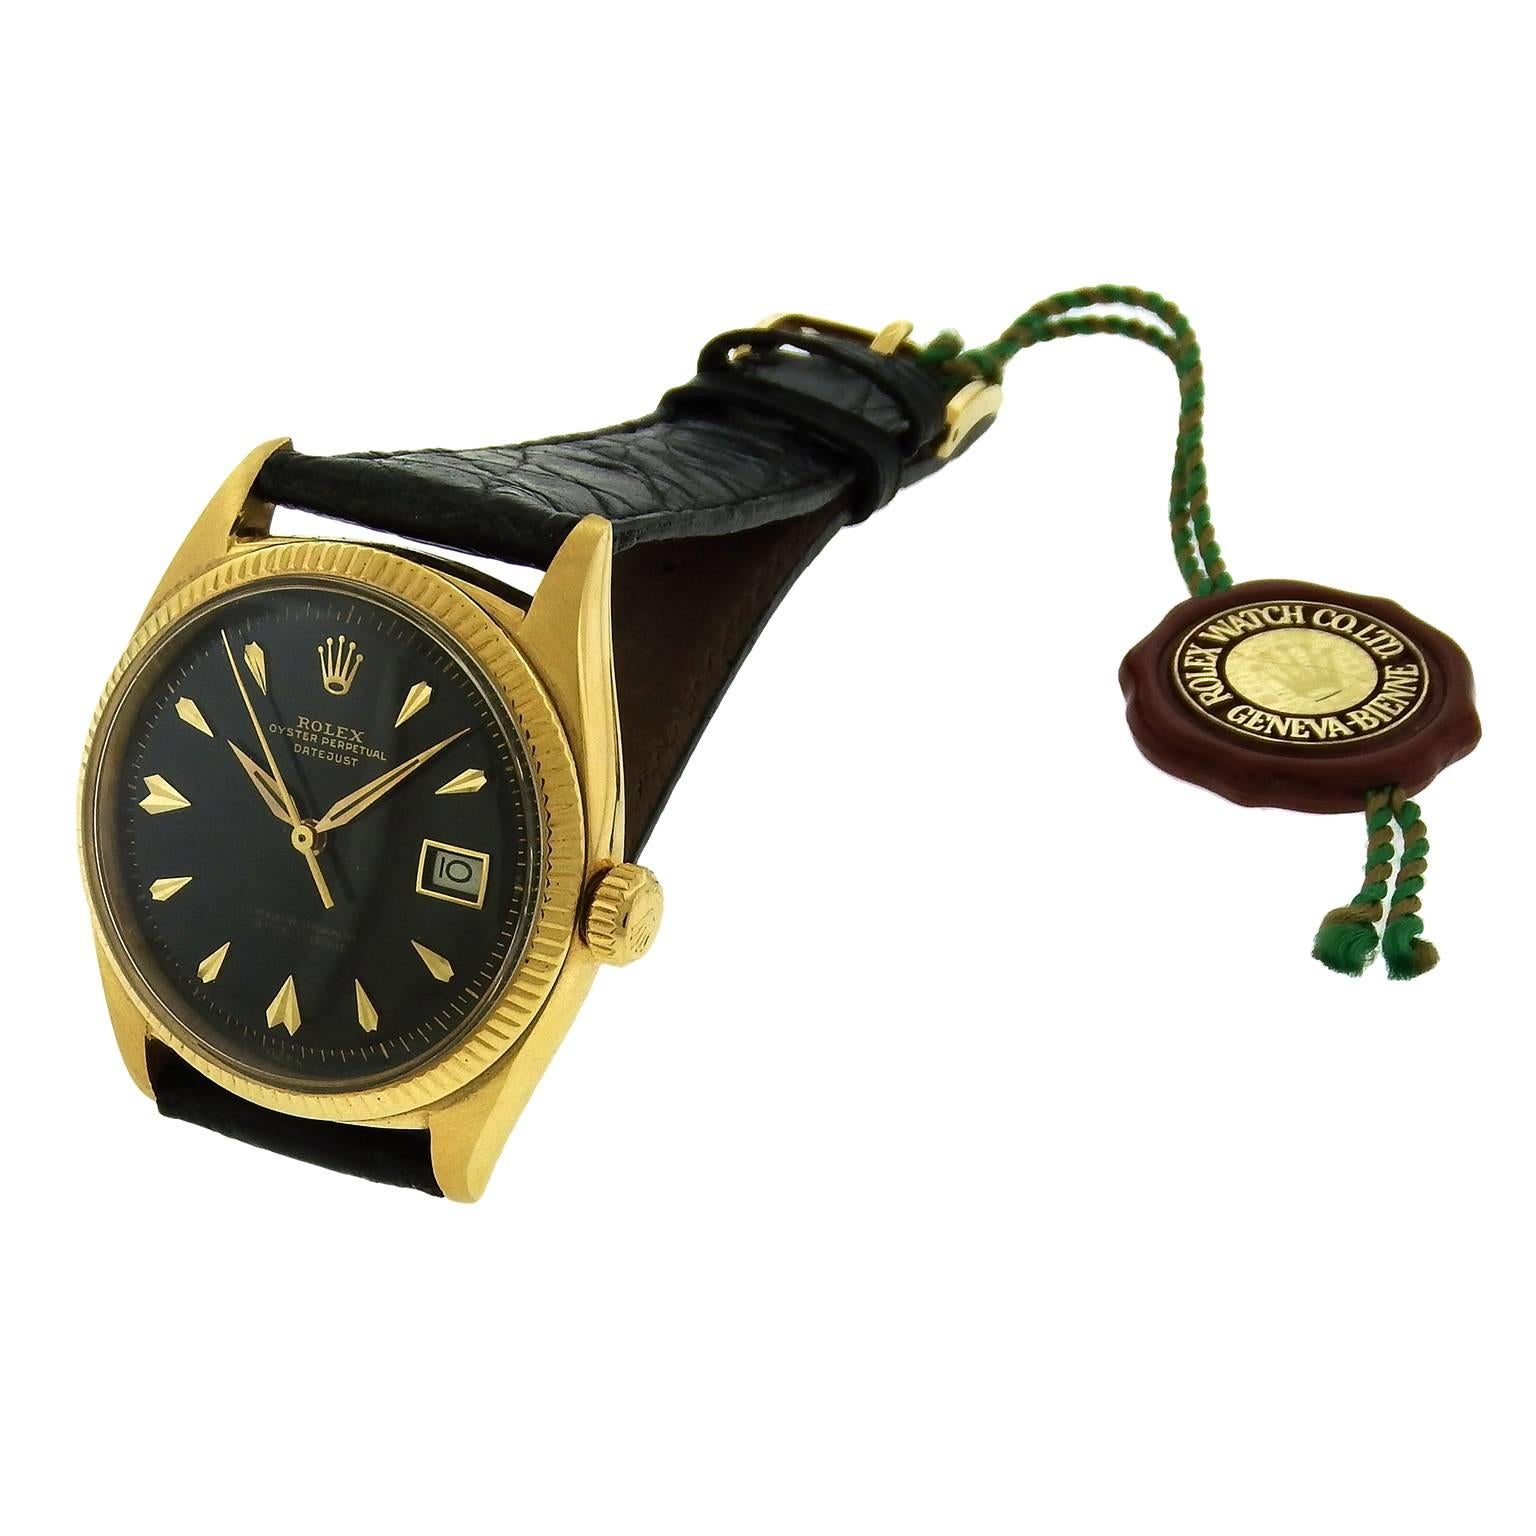 18K yellow gold Rolex Ref. 6605 Oyster Perpetual Datejust, circa 1950's, is a tonneau-shaped, center seconds, self-winding, water-resistant, 18K yellow gold wristwatch with date.  The 36mm case has a screwed-down case back and crown, fluted bezel,